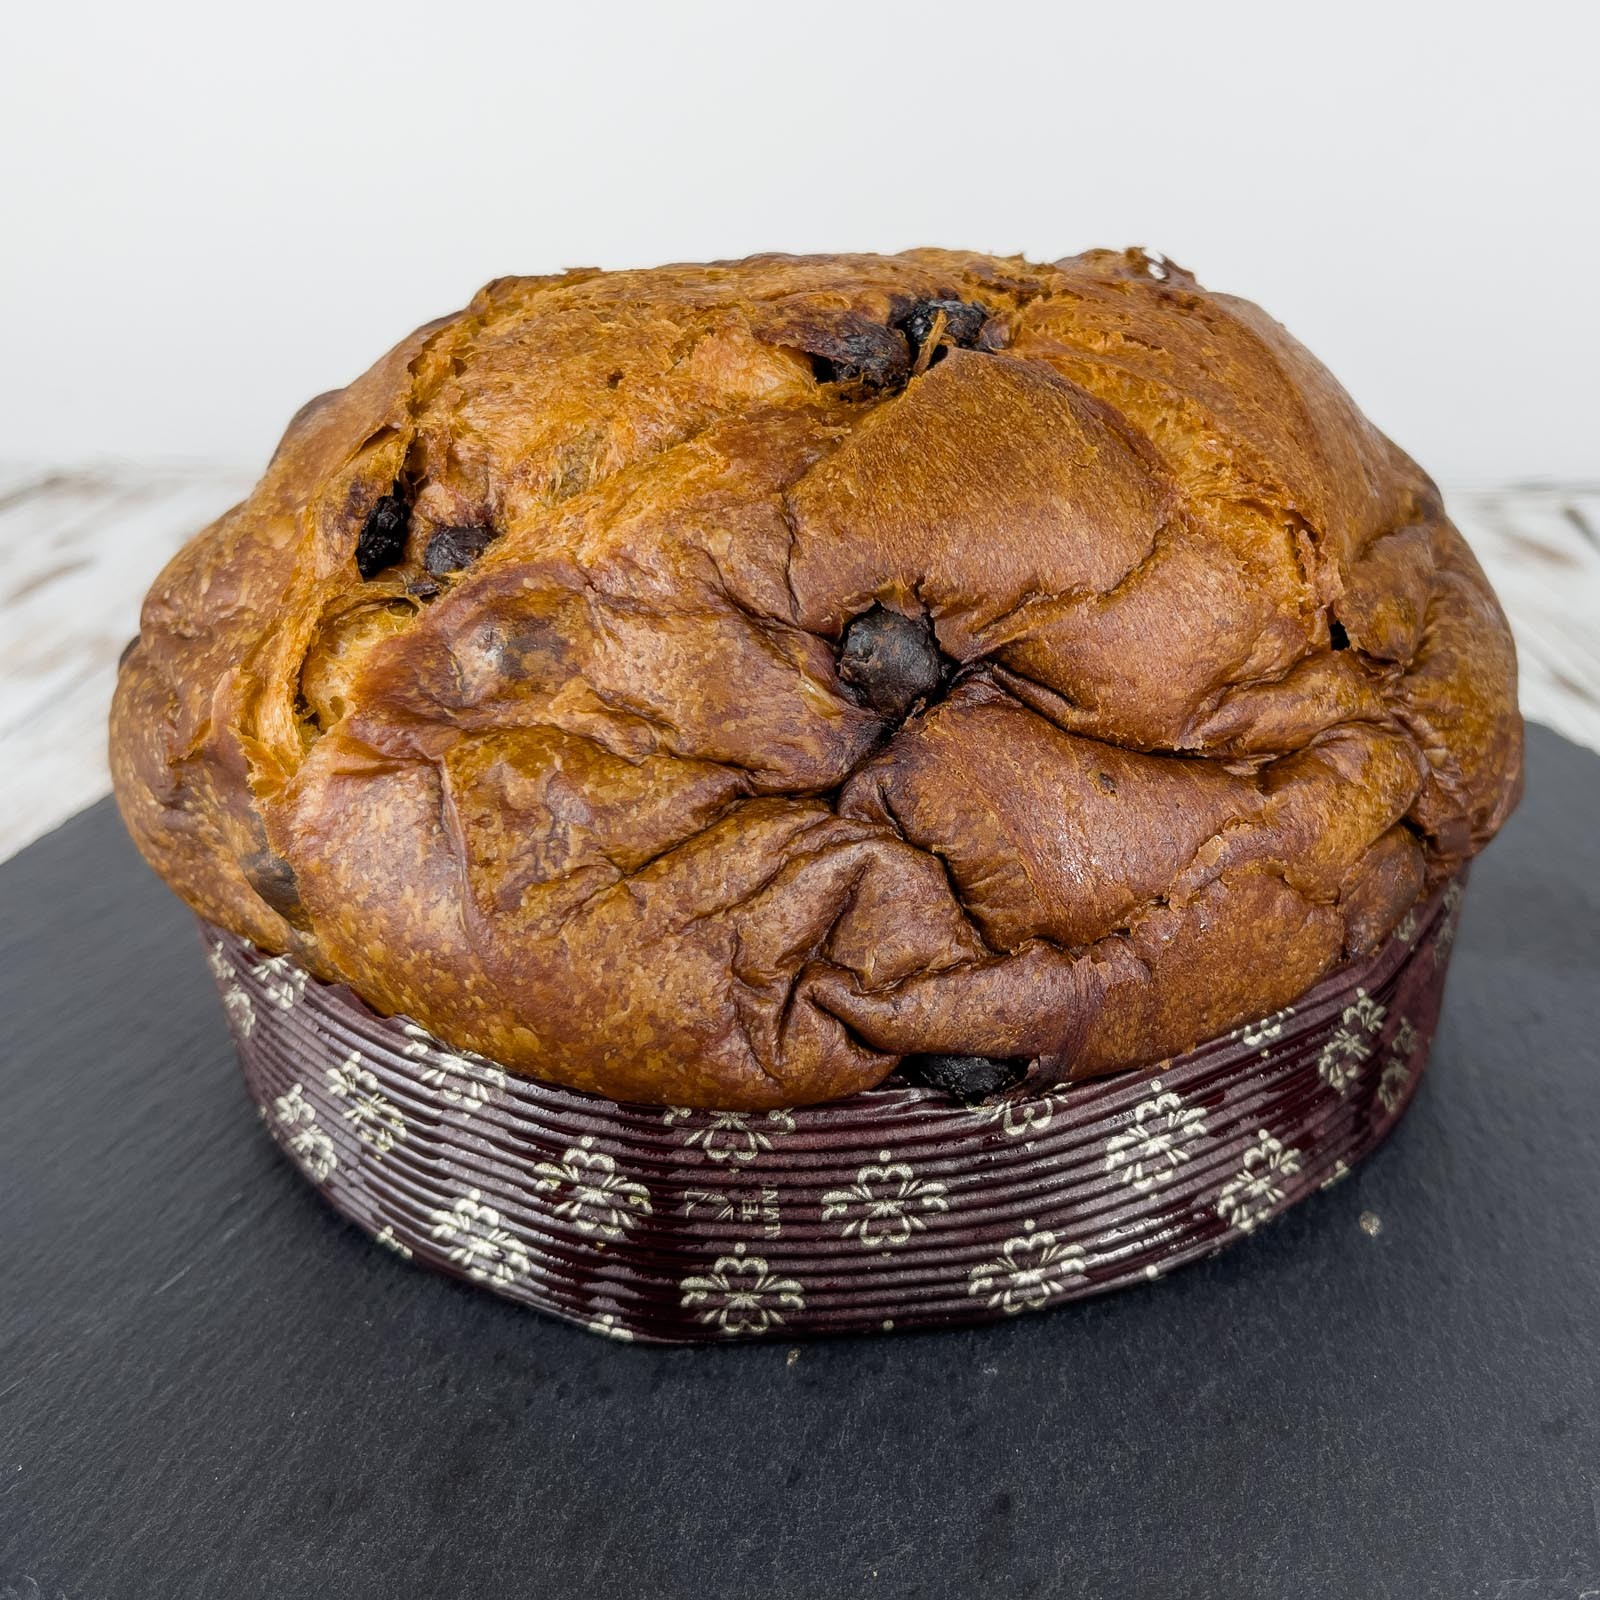 “Panzuppo” is a Tuscan dessert produced by the Fabio E Gianni pastry shop. Its shape, the slow natural leavening and the presence of raisins make it similar to the milanese panettone, but the main difference lies in the wetting inside, made up of water, sugar and fortified wine which gives it its characteristic aroma and flavor.